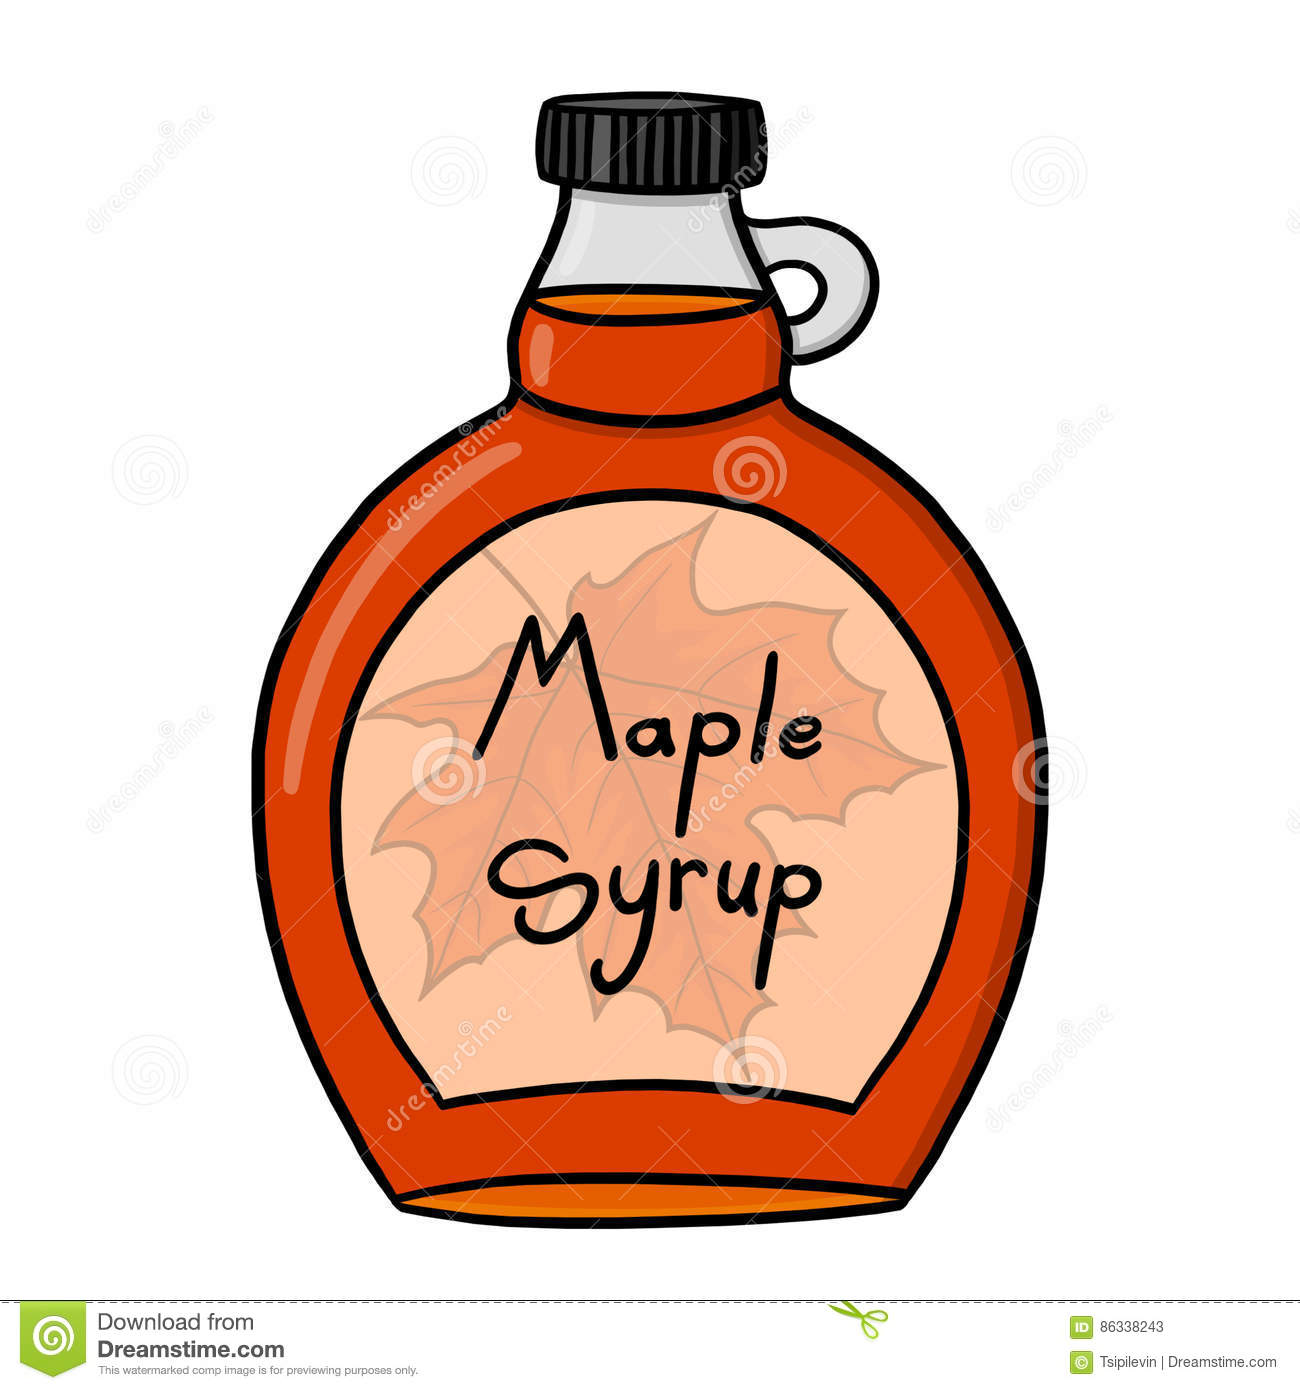 Maple syrup clipart 2 » Clipart Station.